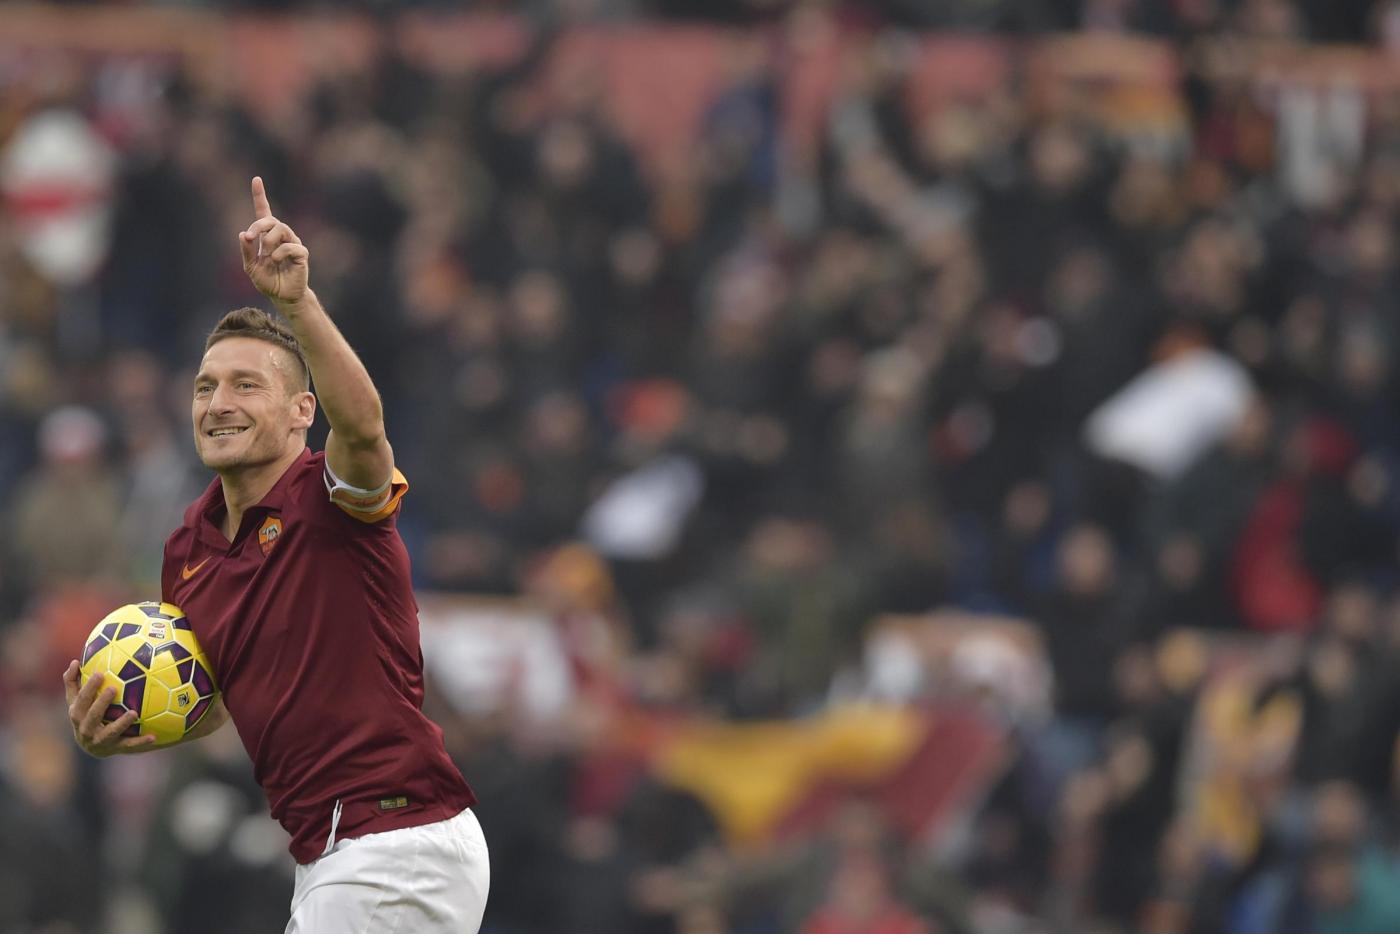 Will Totti catapult his team to victory at Palermo?